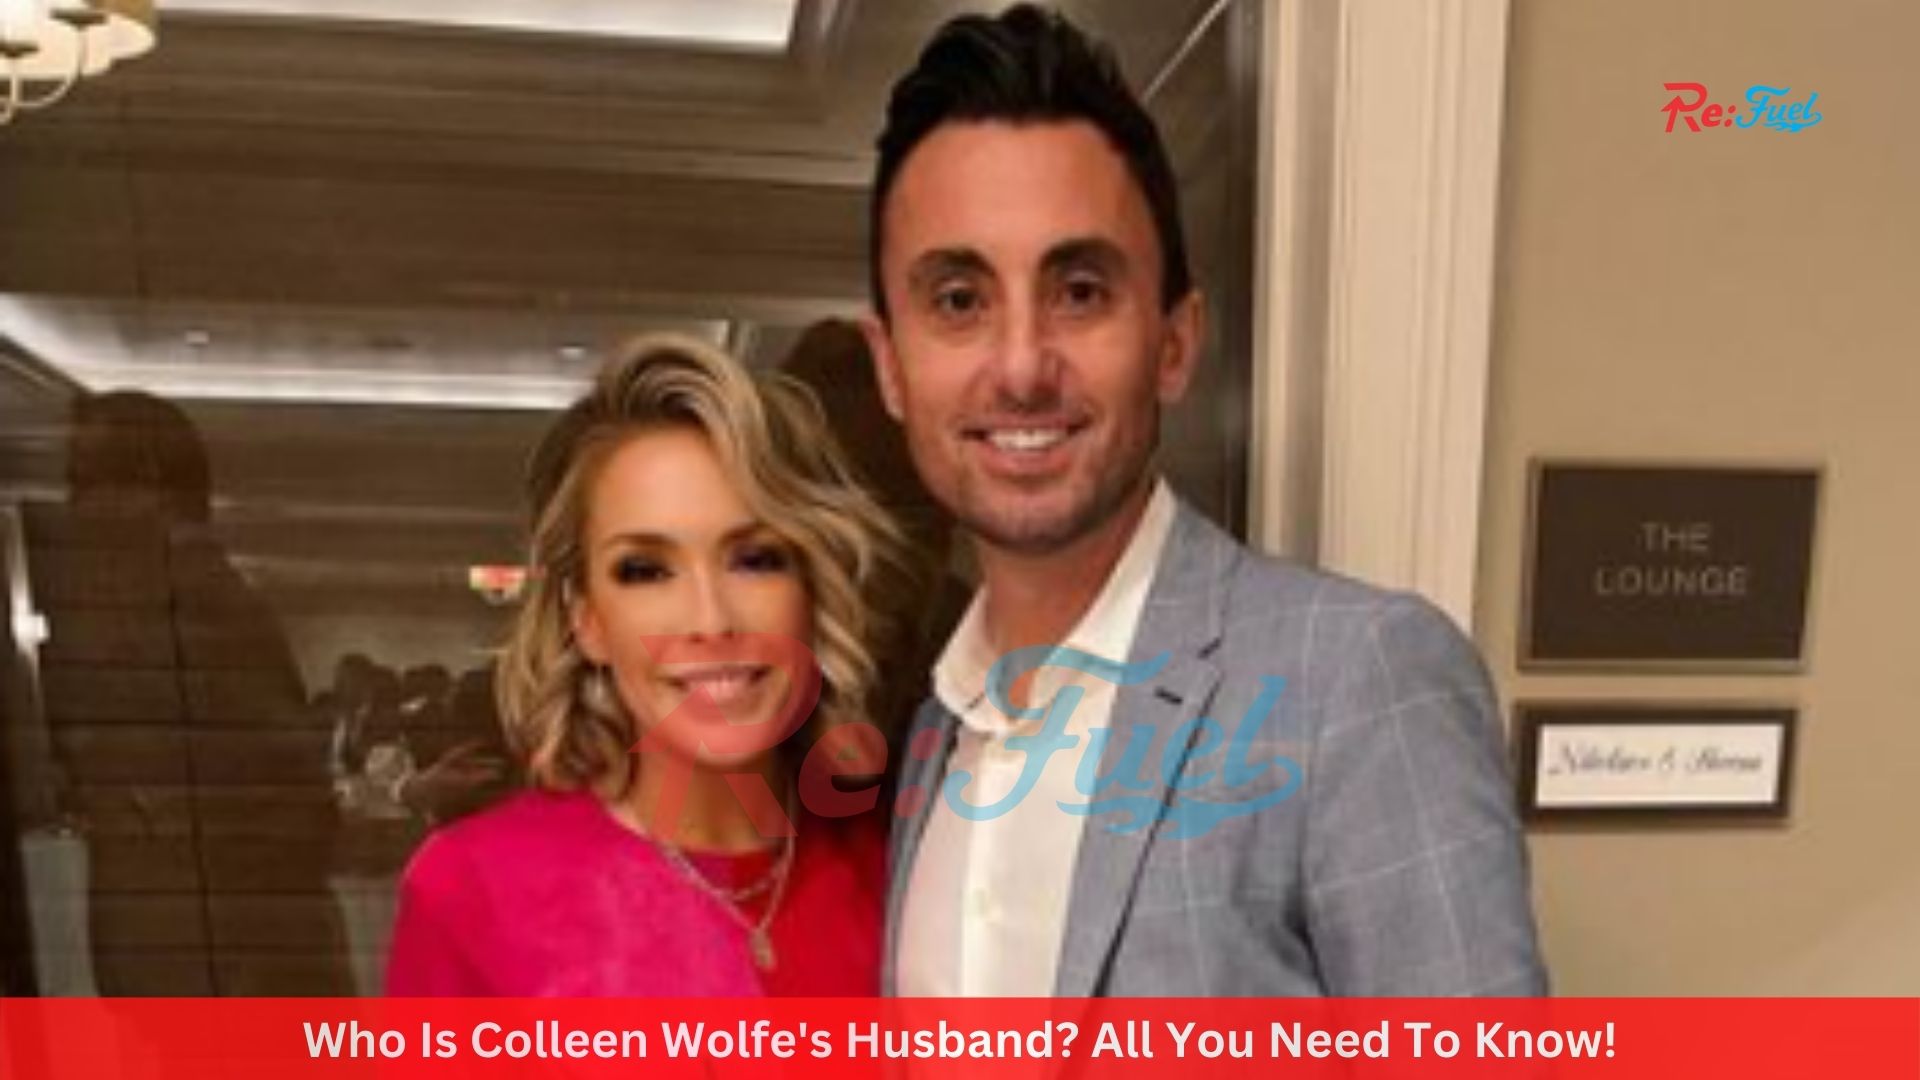 Who Is Colleen Wolfe's Husband? All You Need To Know!